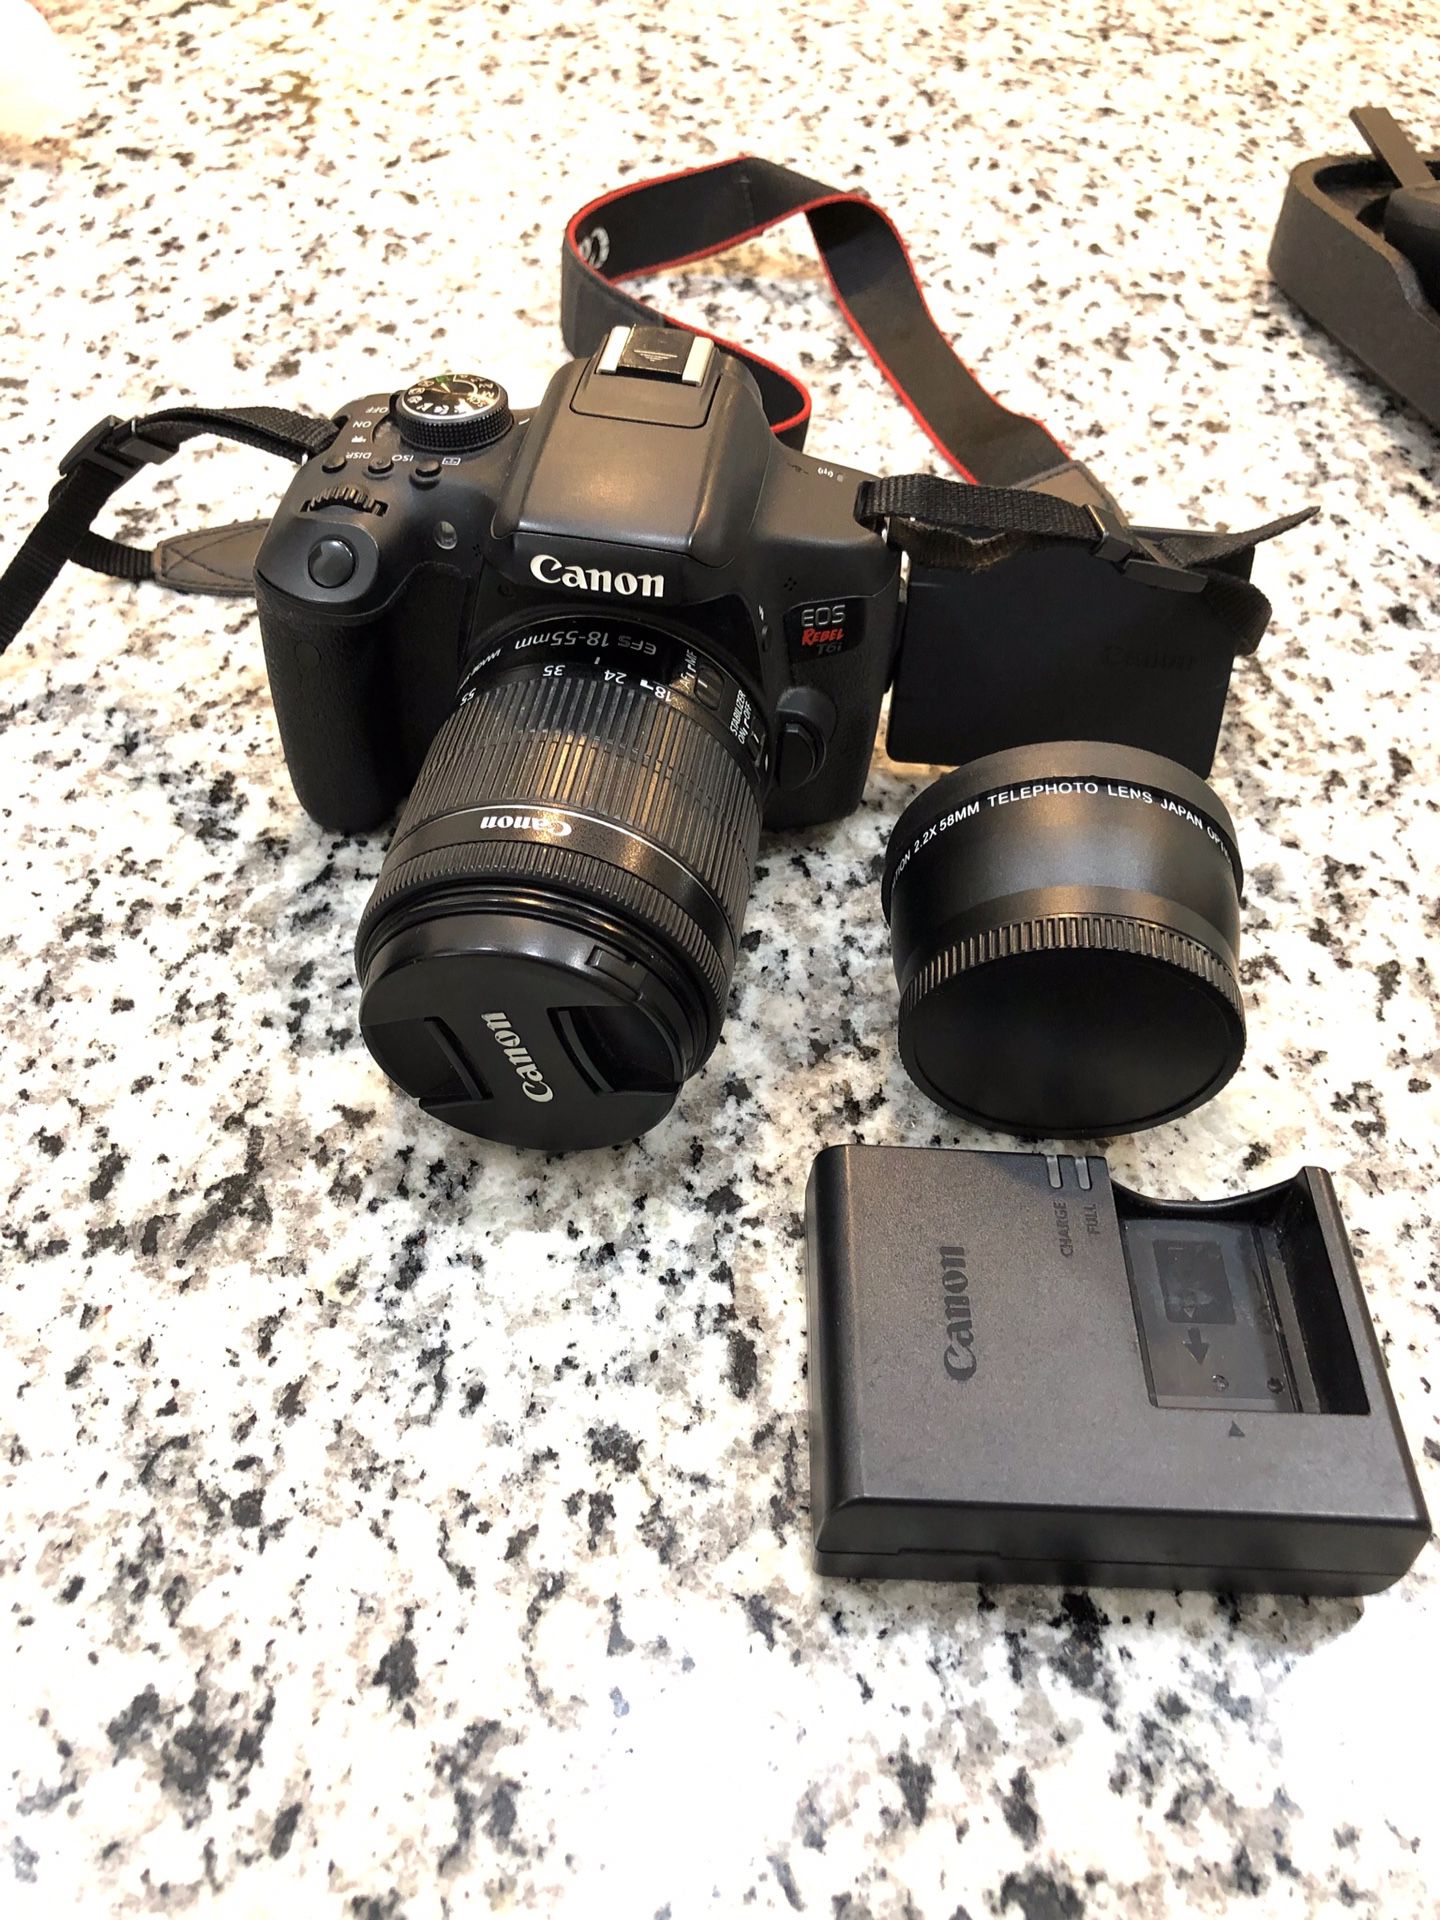 Canon T6i professional DSLR camera with two lenses (18-55mm and 2.2x 58mm telephoto lens)